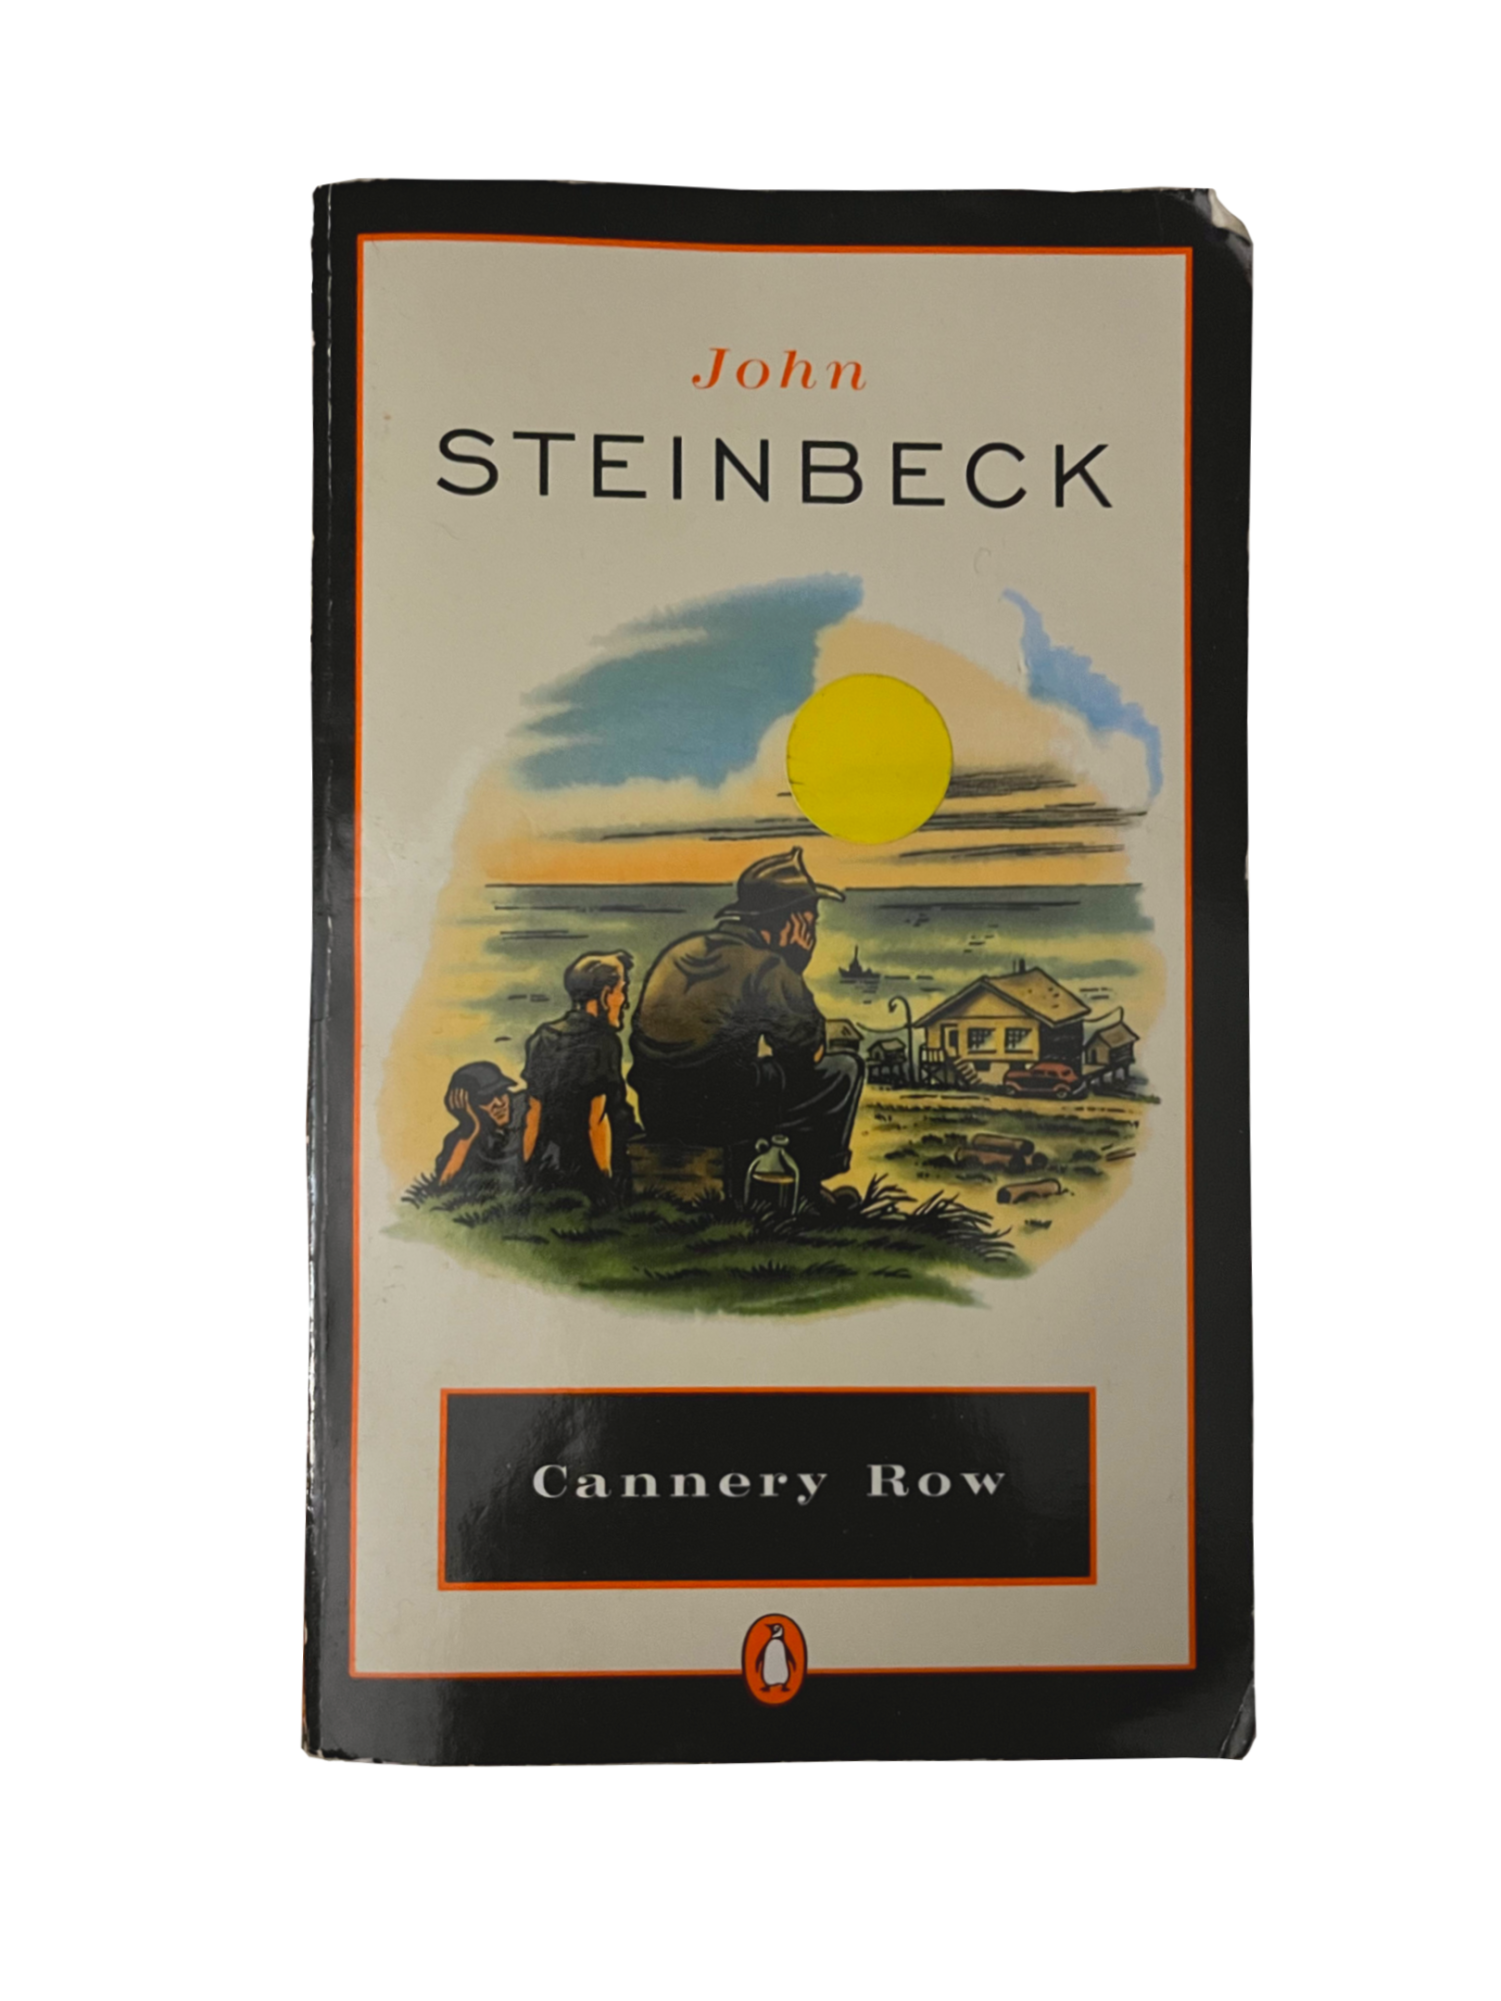 The Nobel Prize winner in Literature, John Steinbeck, examines human nature through this iconic piece of literature, Cannery Row. This book is a great read if you are looking for a dreamy and beautiful read over holiday break.